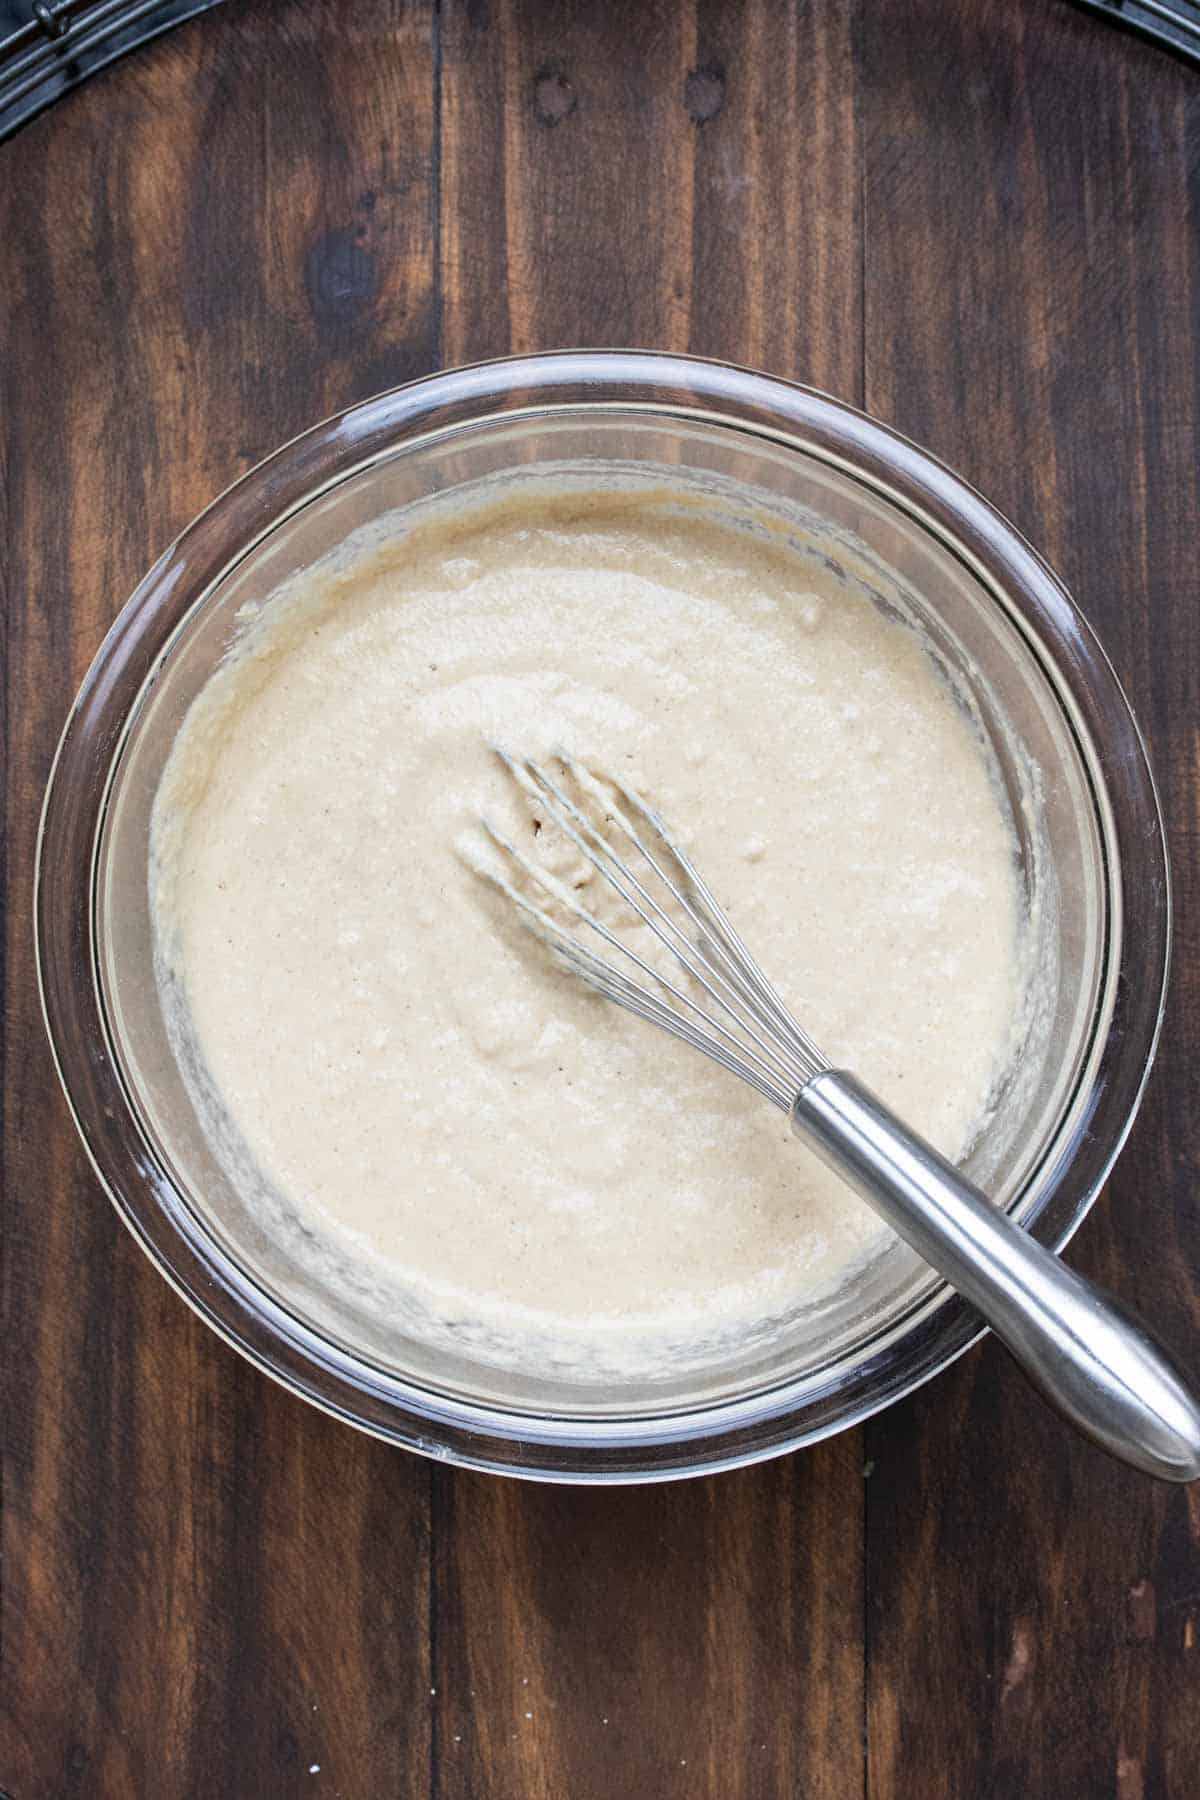 Whisk mixing pancake batter in a glass bowl